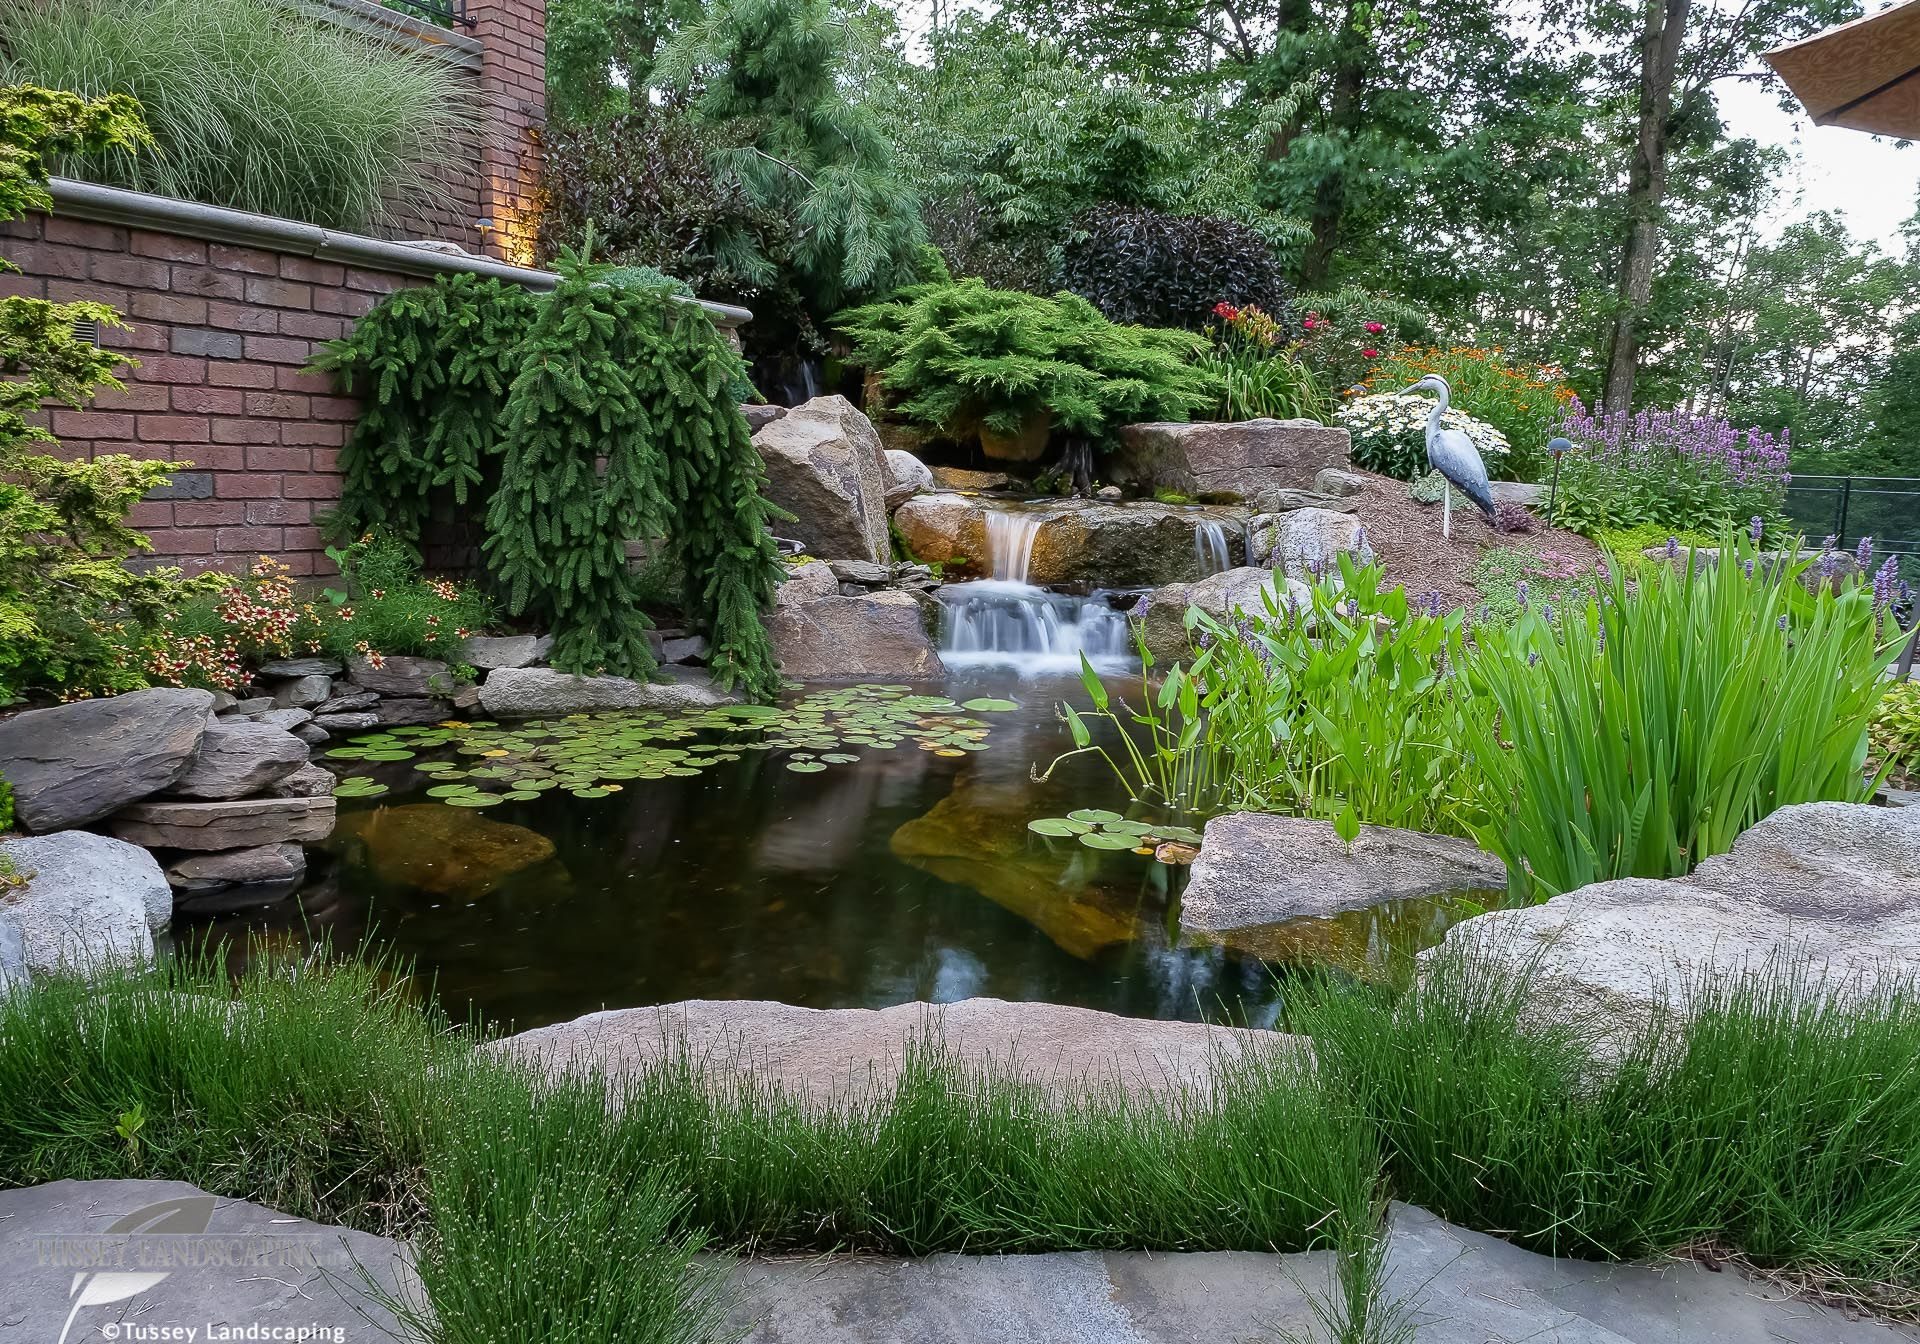 A backyard pond with a waterfall and rocks.